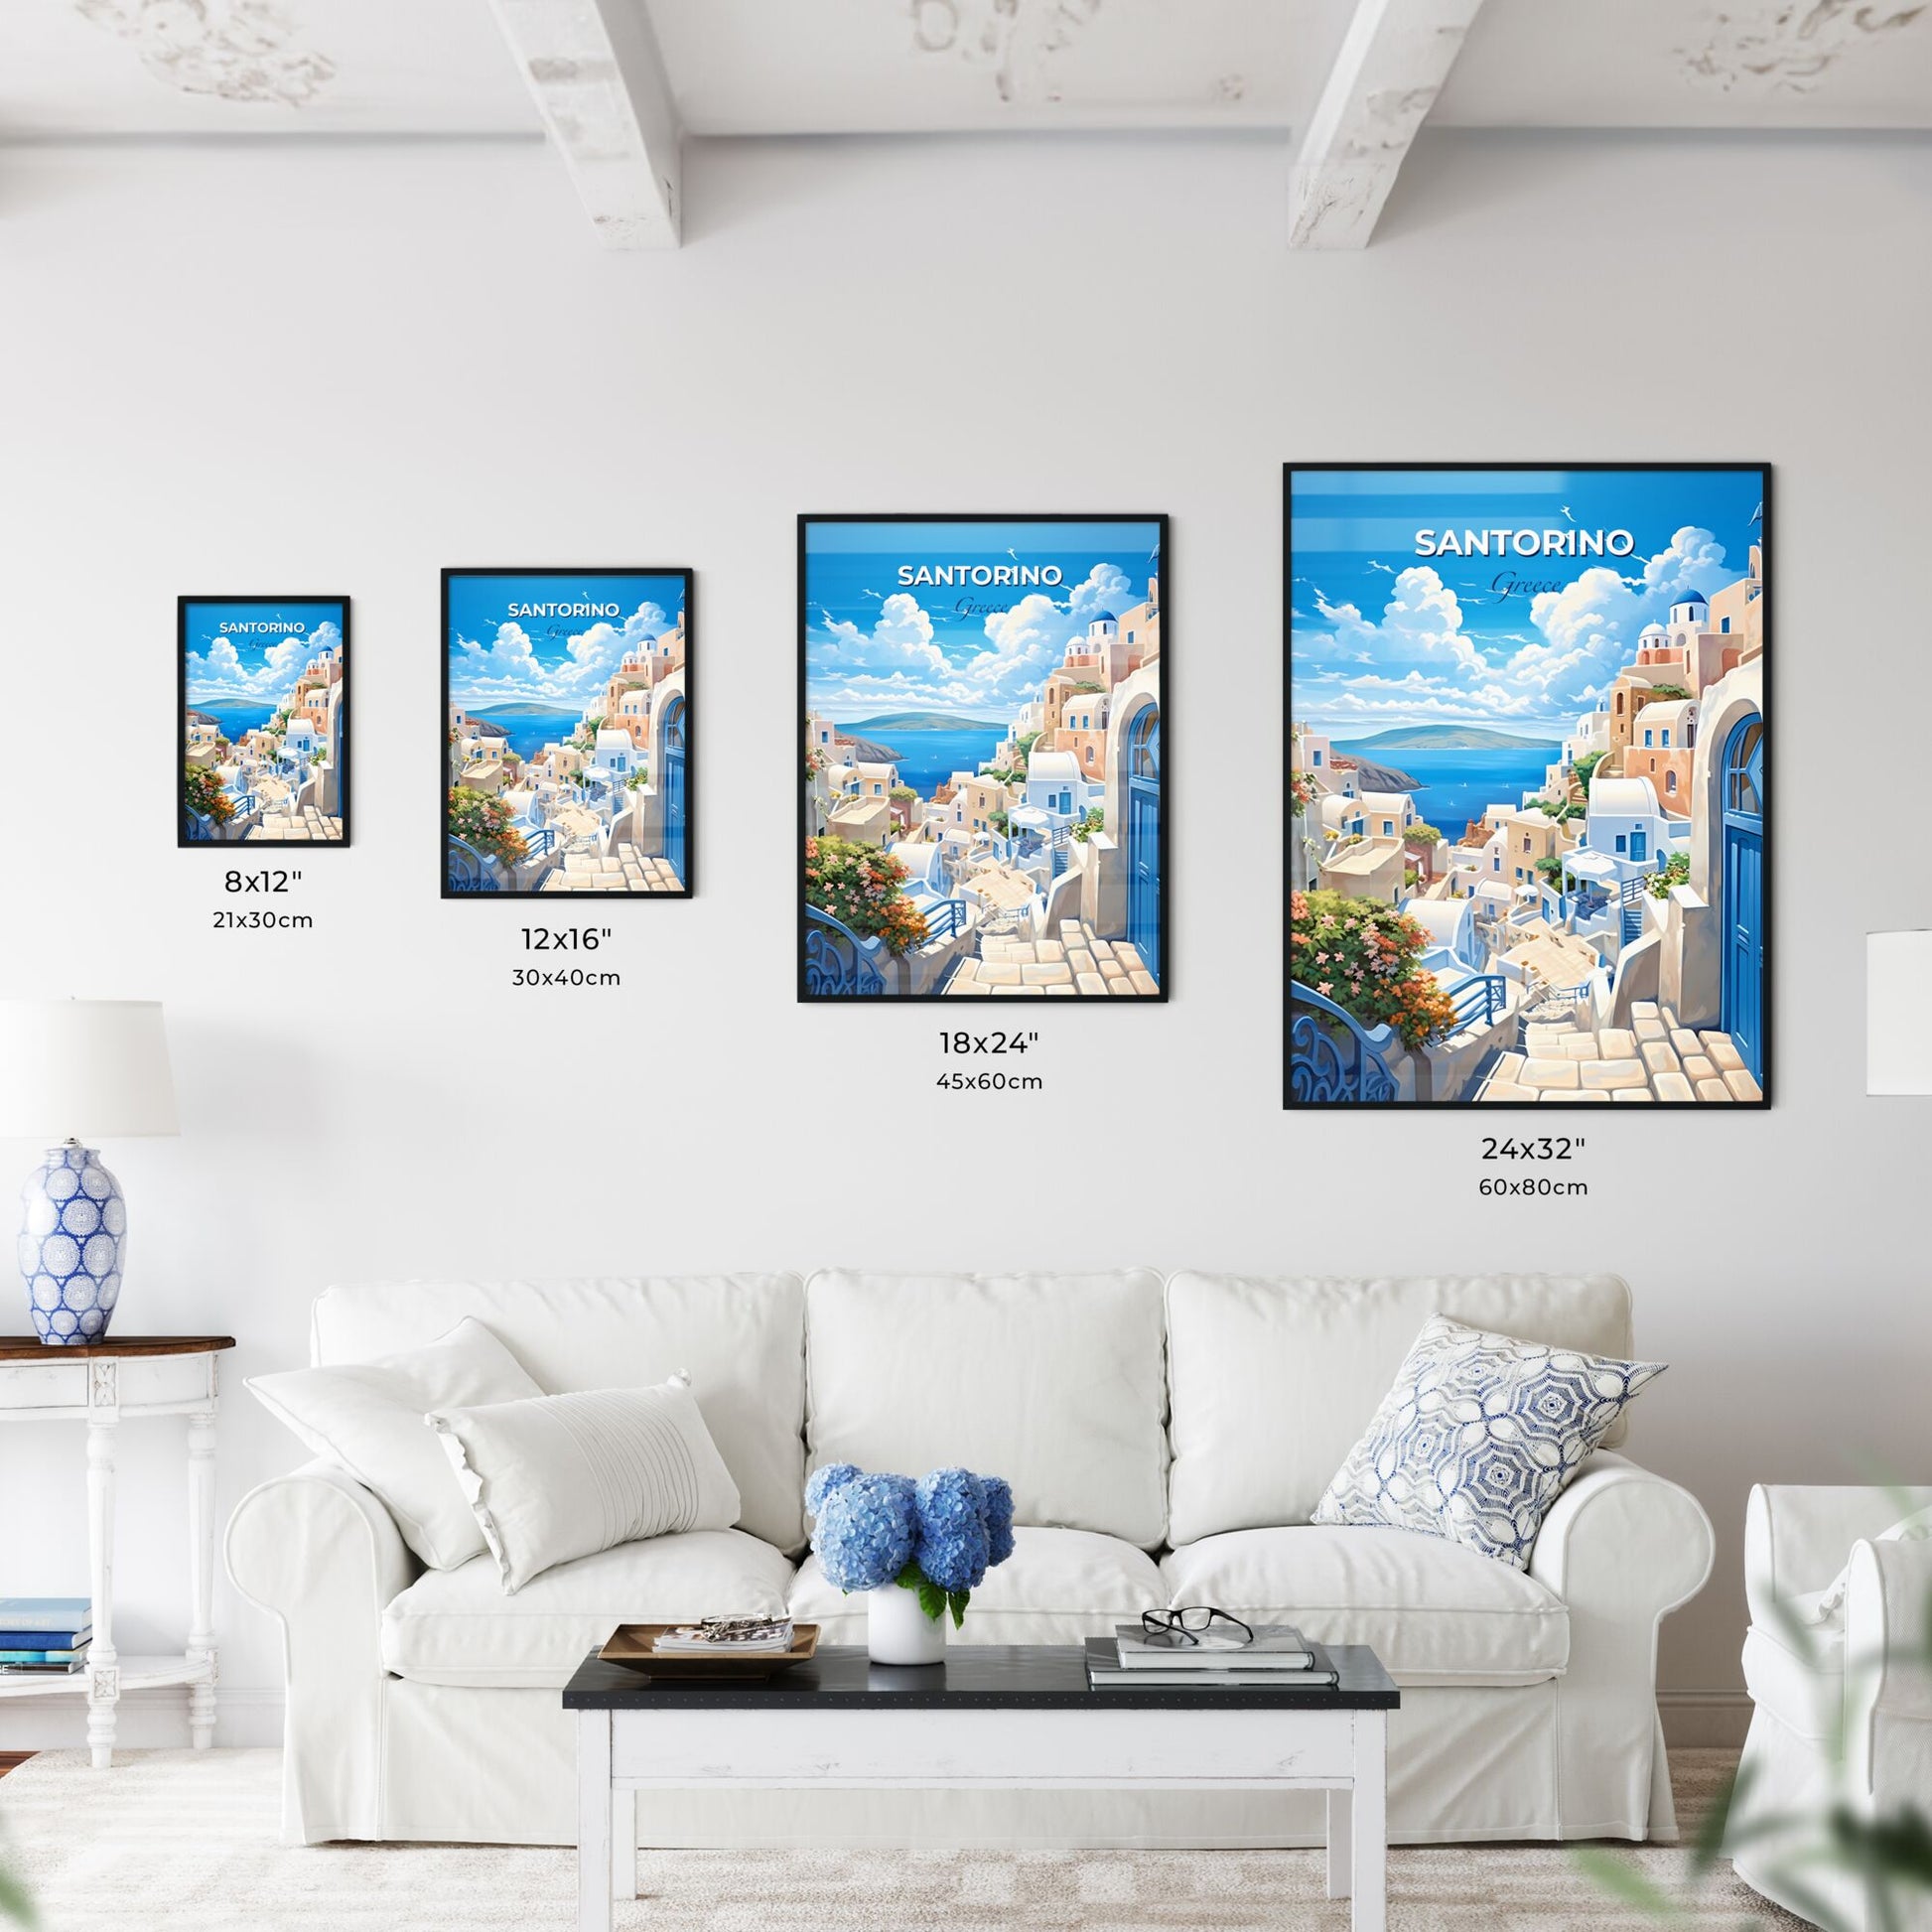 Santorino Greece Skyline - A Painting Of A Town On A Hill With A Body Of Water In The Background - Customizable Travel Gift Default Title